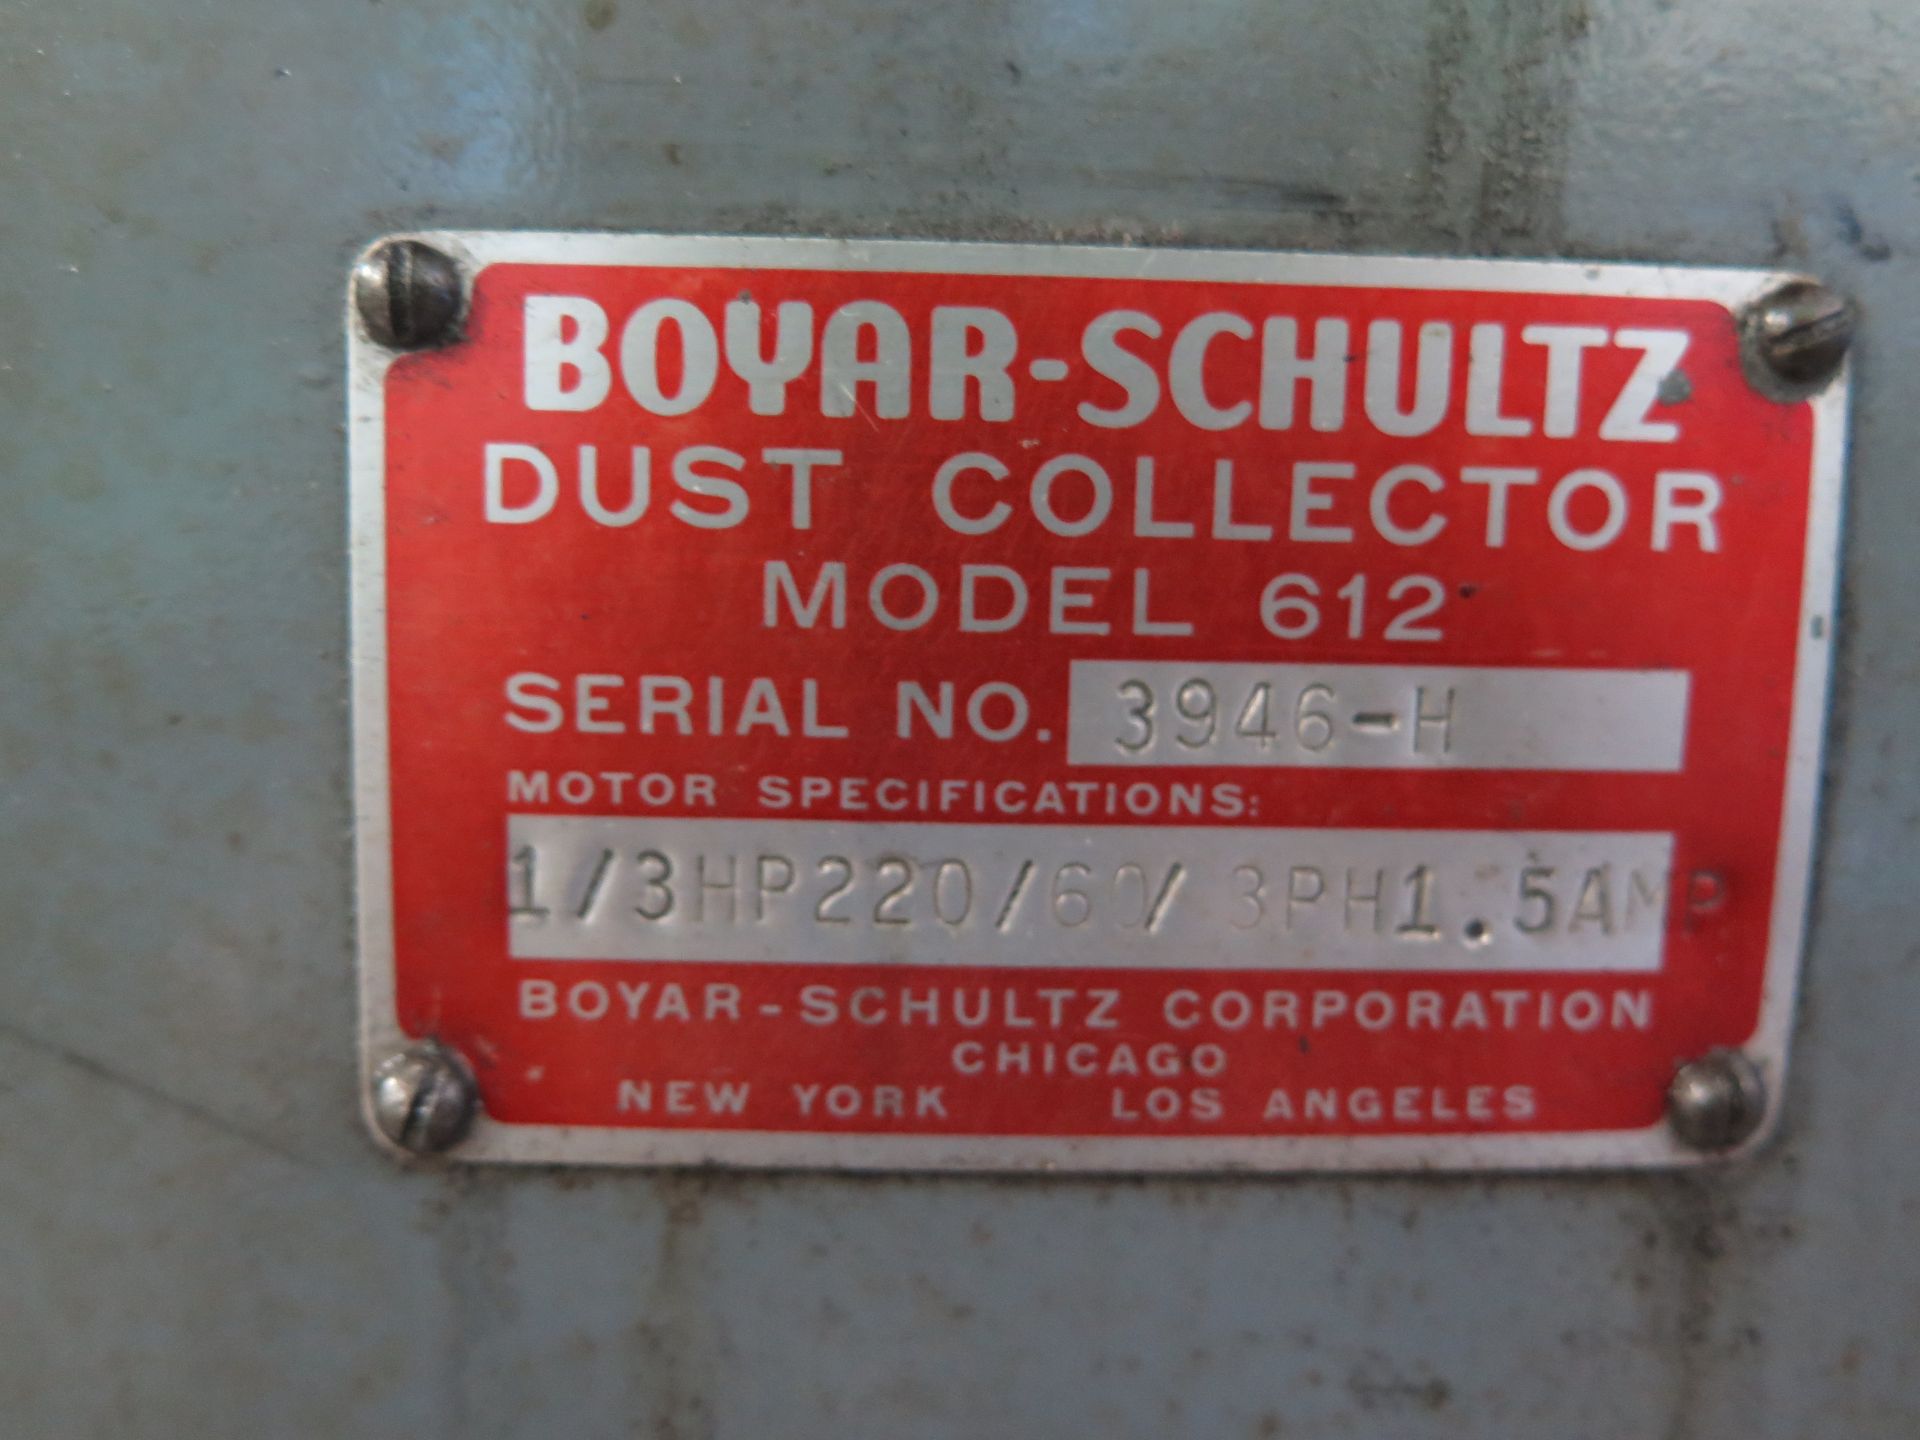 BOYAR SCHULTZ 2A CHALLENGER DELUXE 6” X 18” AUTOMATIC HYDRAULIC SURFACE GRINDER S/N 3946-H W/ 6” X - Image 5 of 5